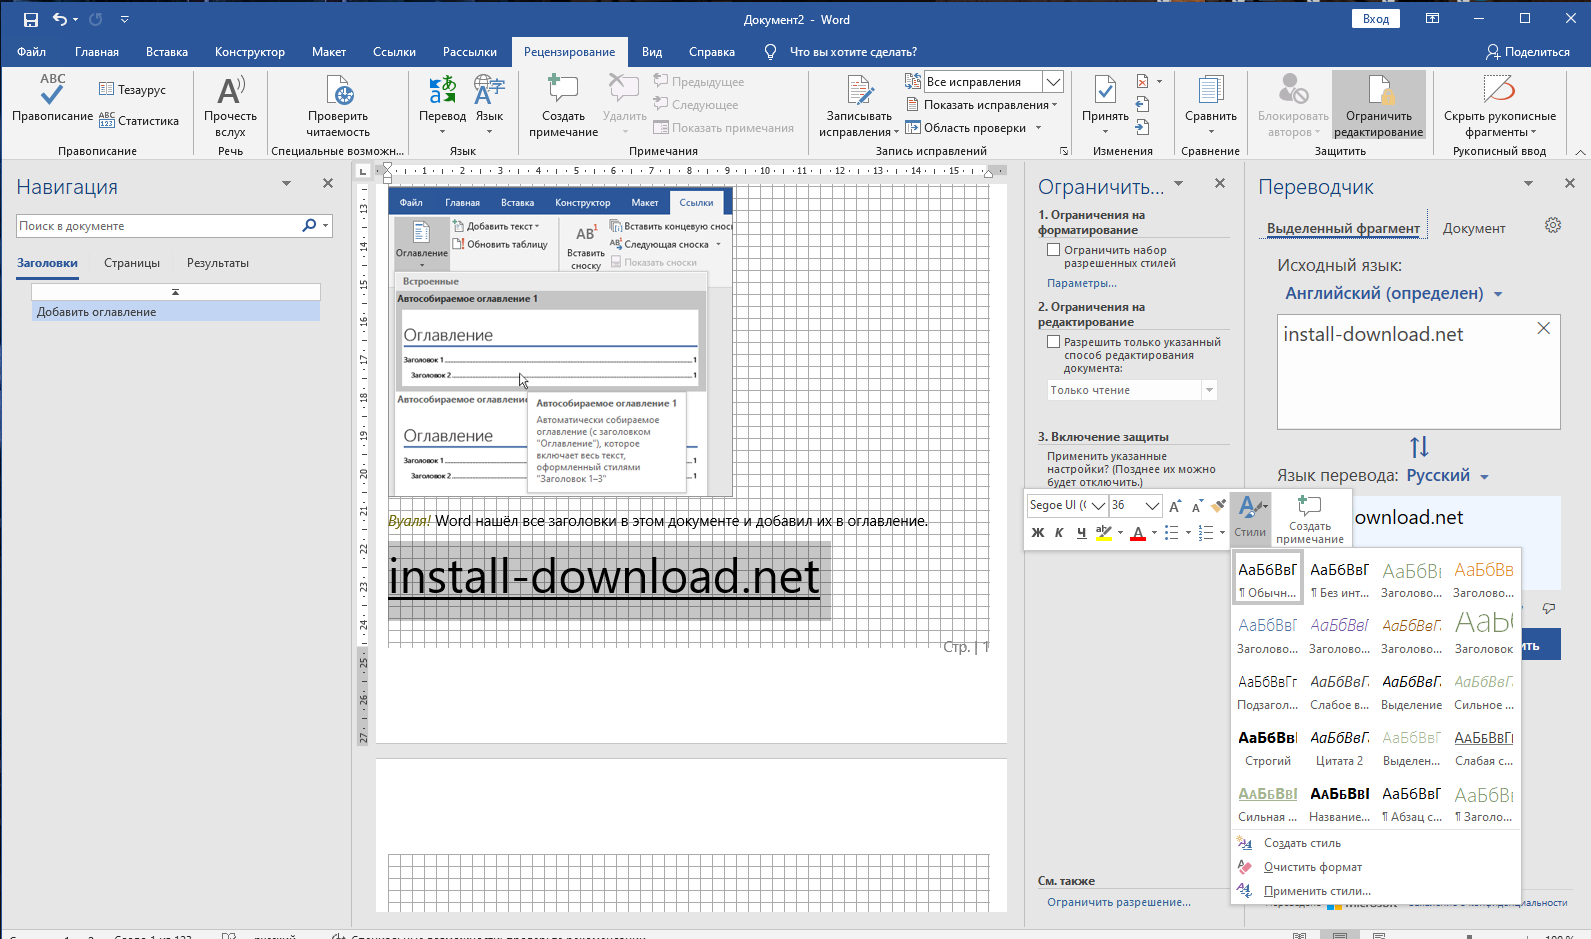 word 2019 download pc